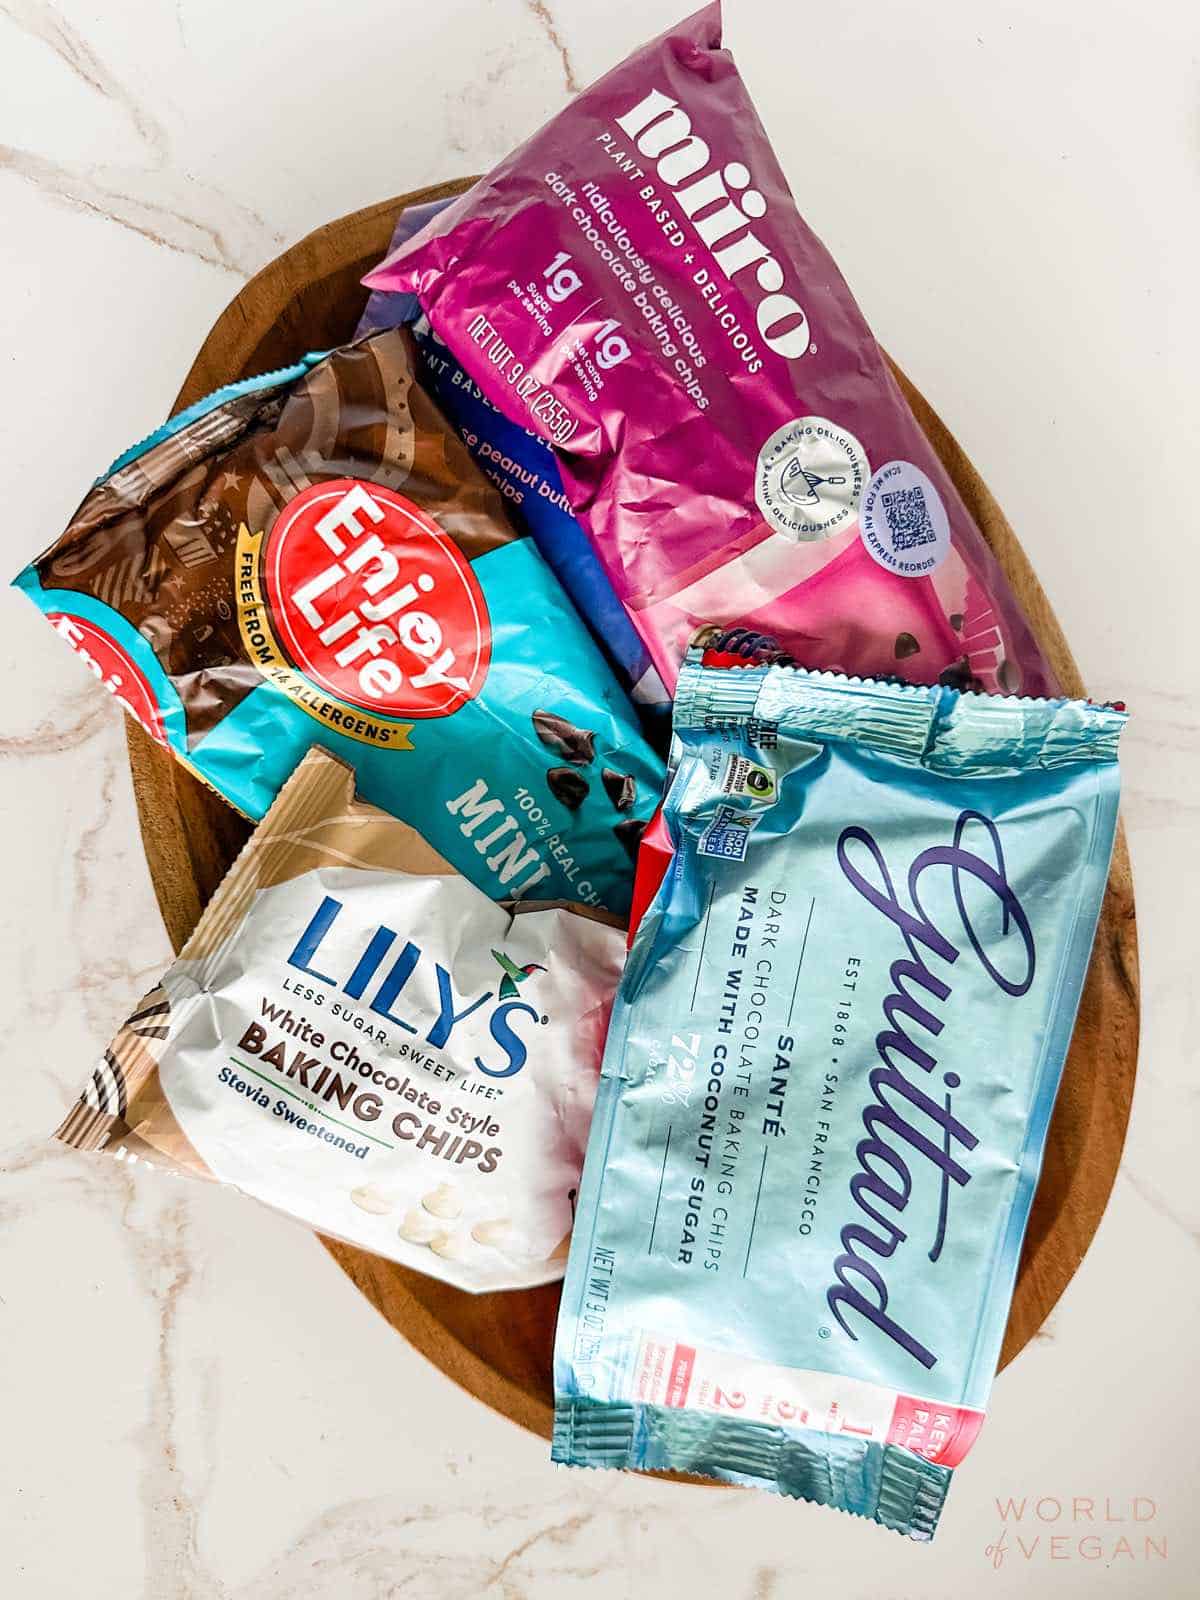 Flatlay showing several different brands of vegan chocolate chips including Guittard, Lily's, Enjoy Life, and Miiro.